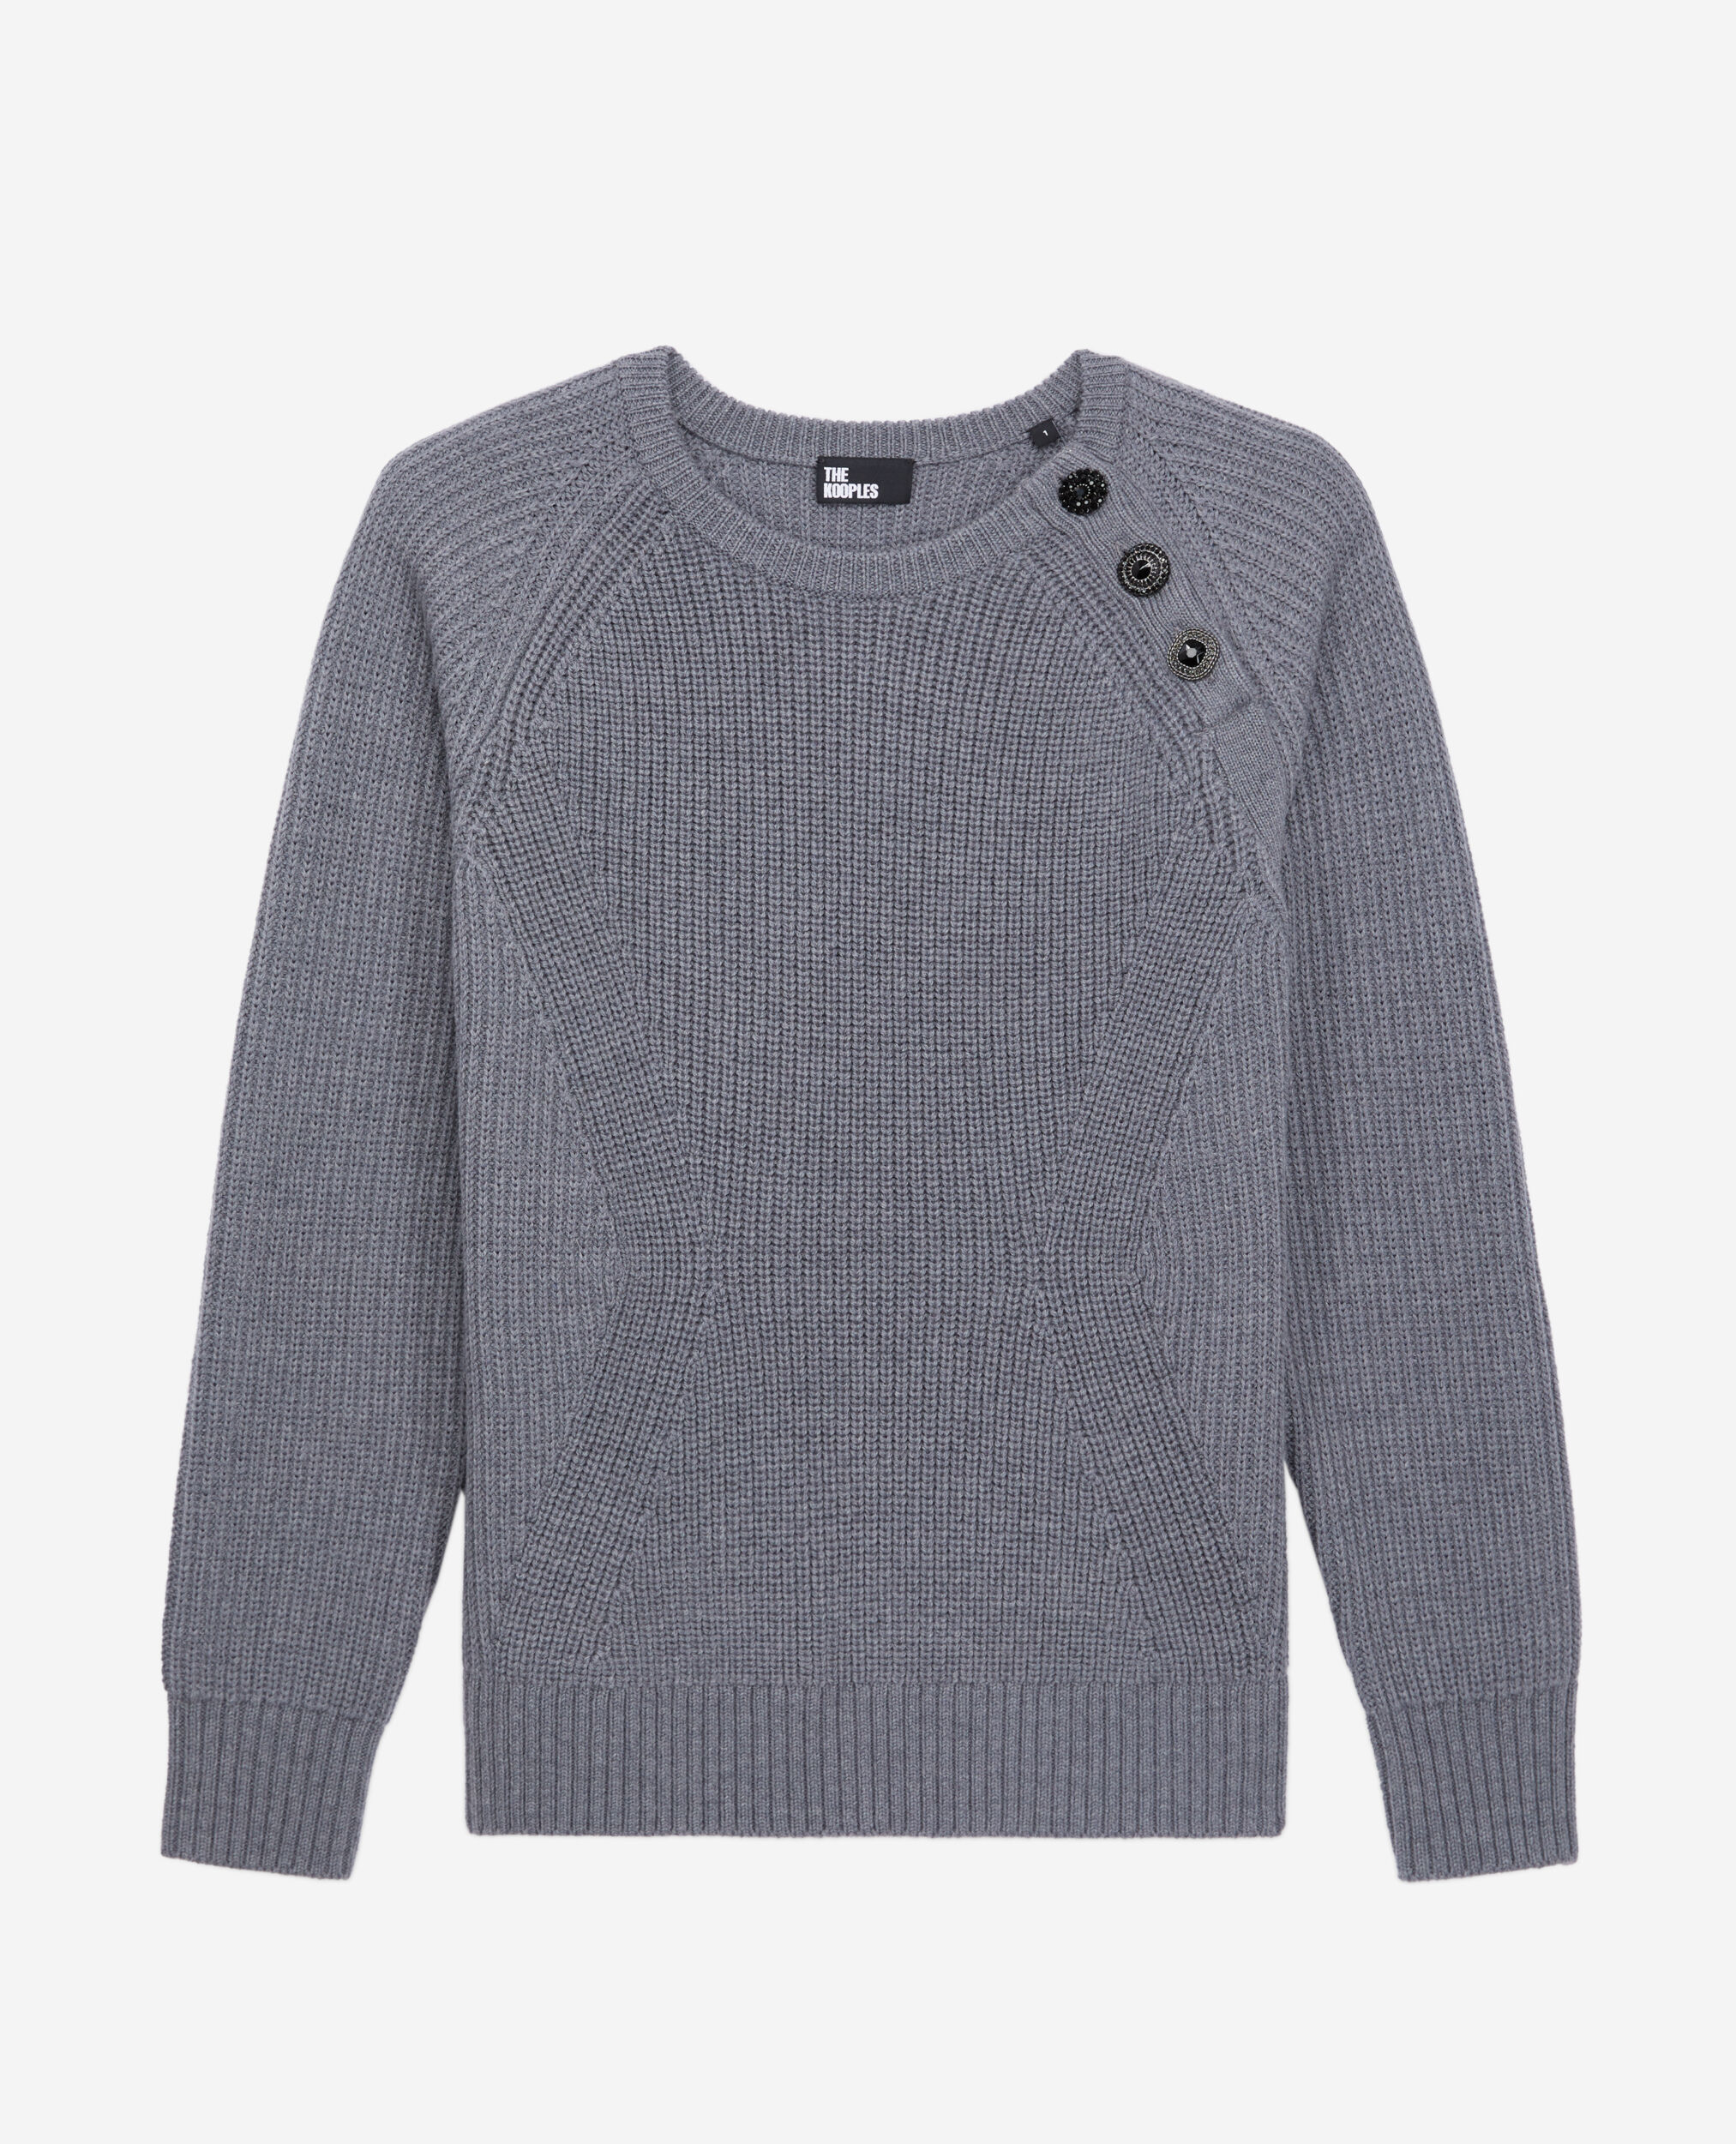 Grey wool sweater with bijou buttons, MIDDLE GREY MEL, hi-res image number null